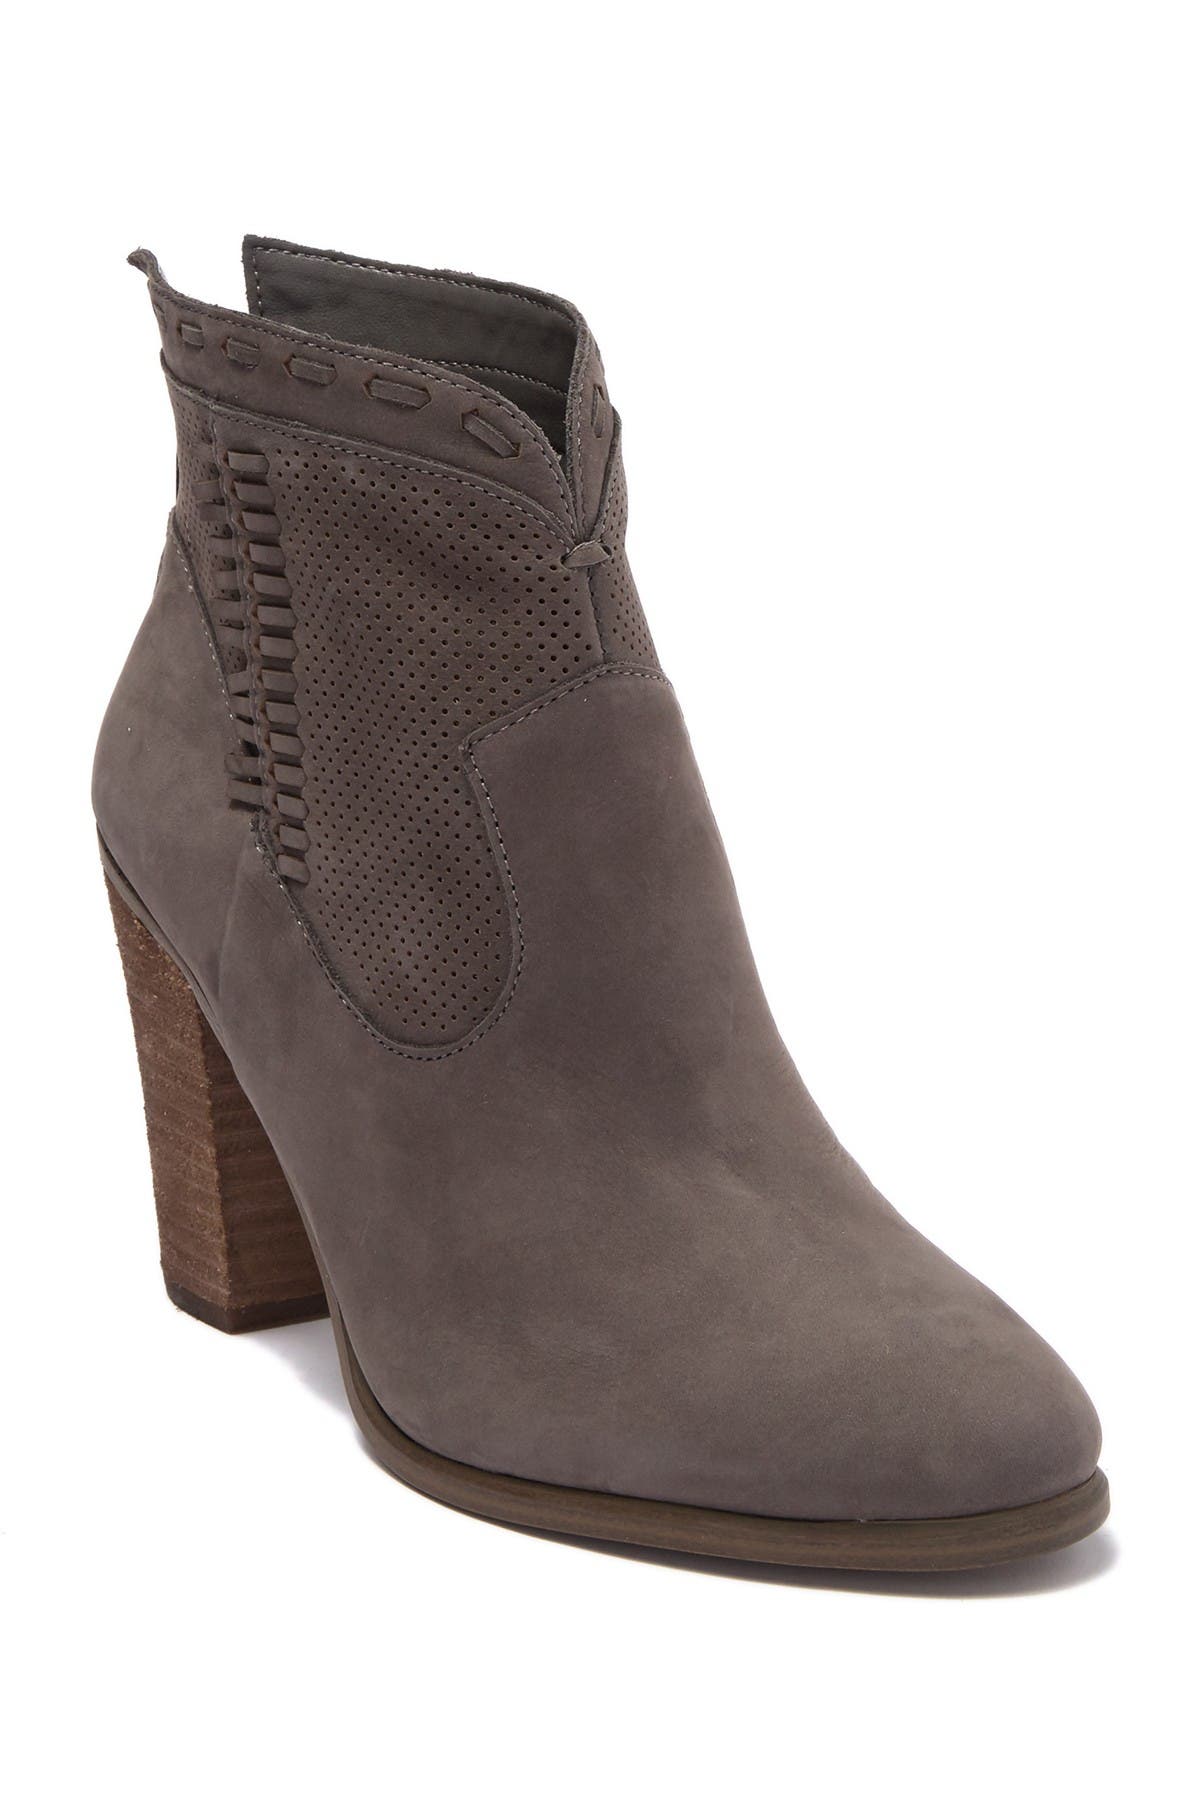 grey vince camuto boots